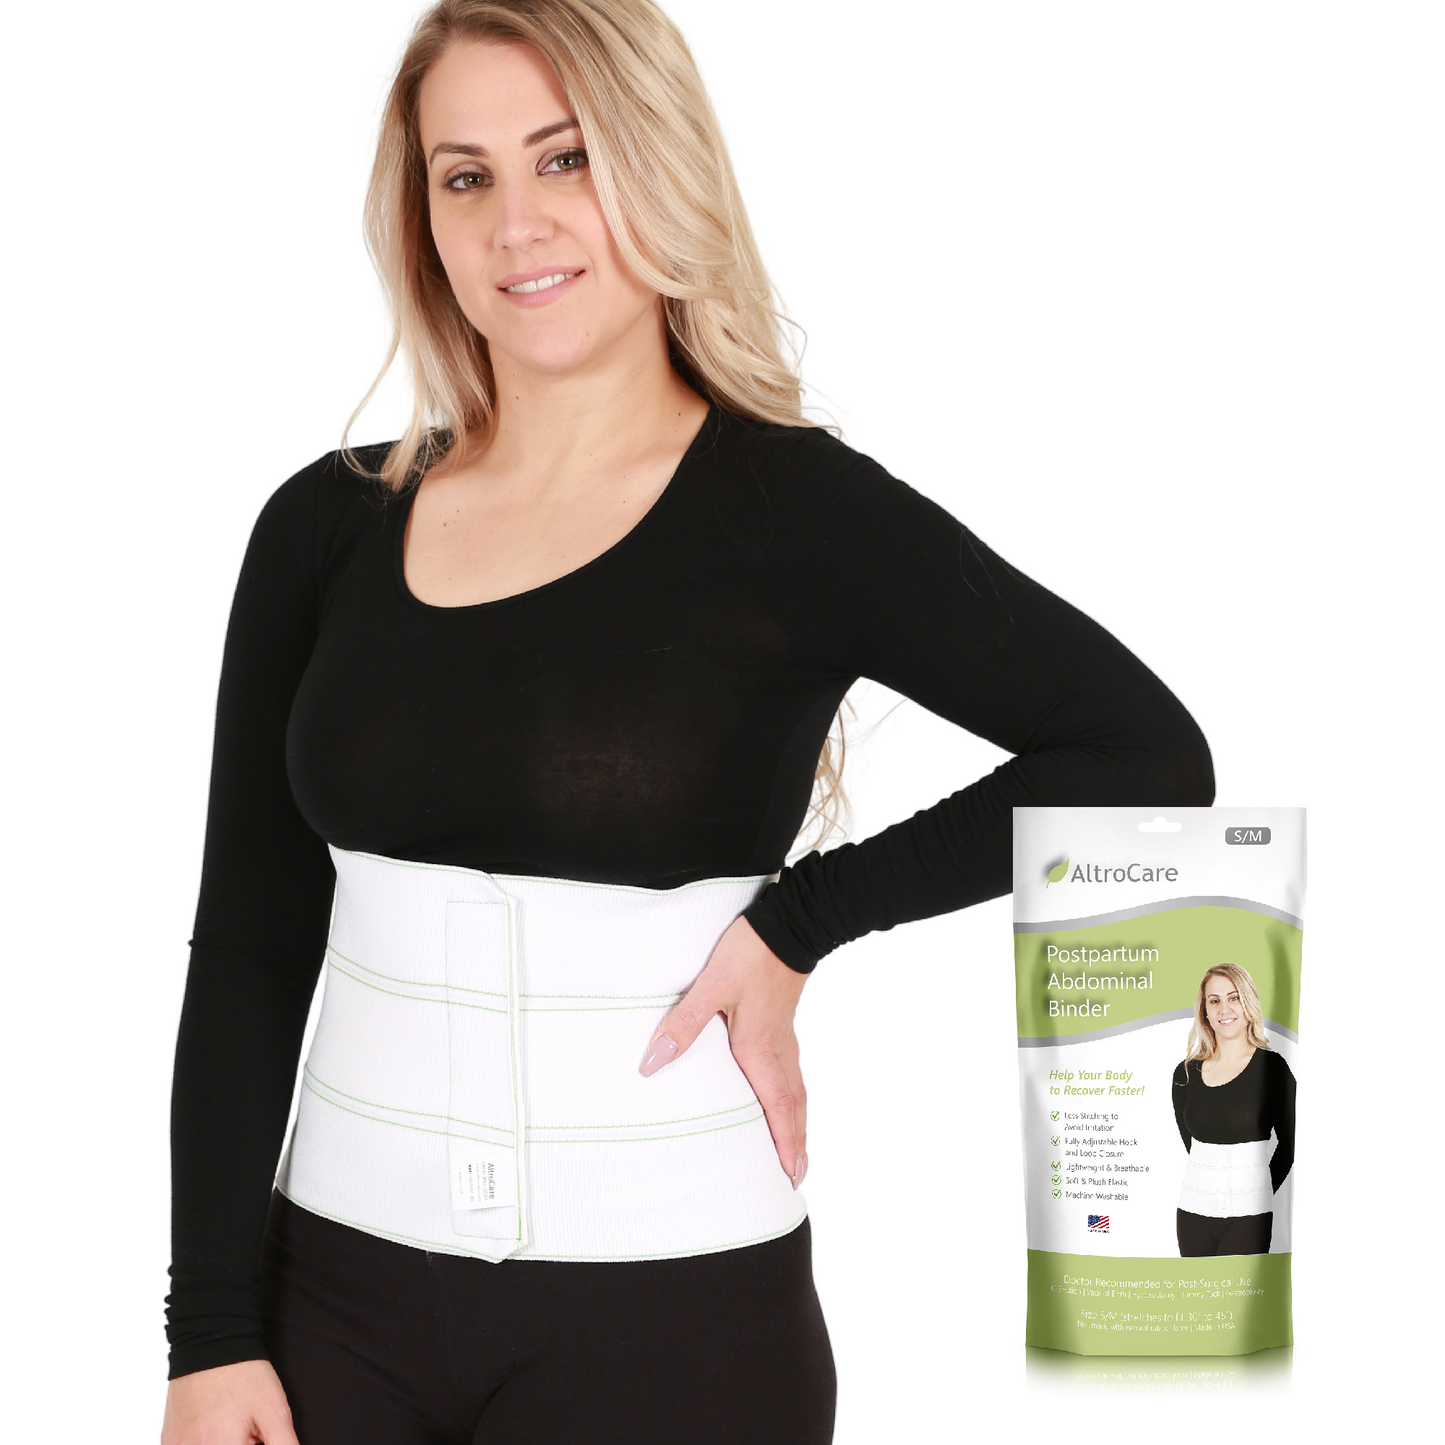 Benefits of Using an Abdominal Belly Wrap After a Hysterectomy – Belly  Bandit